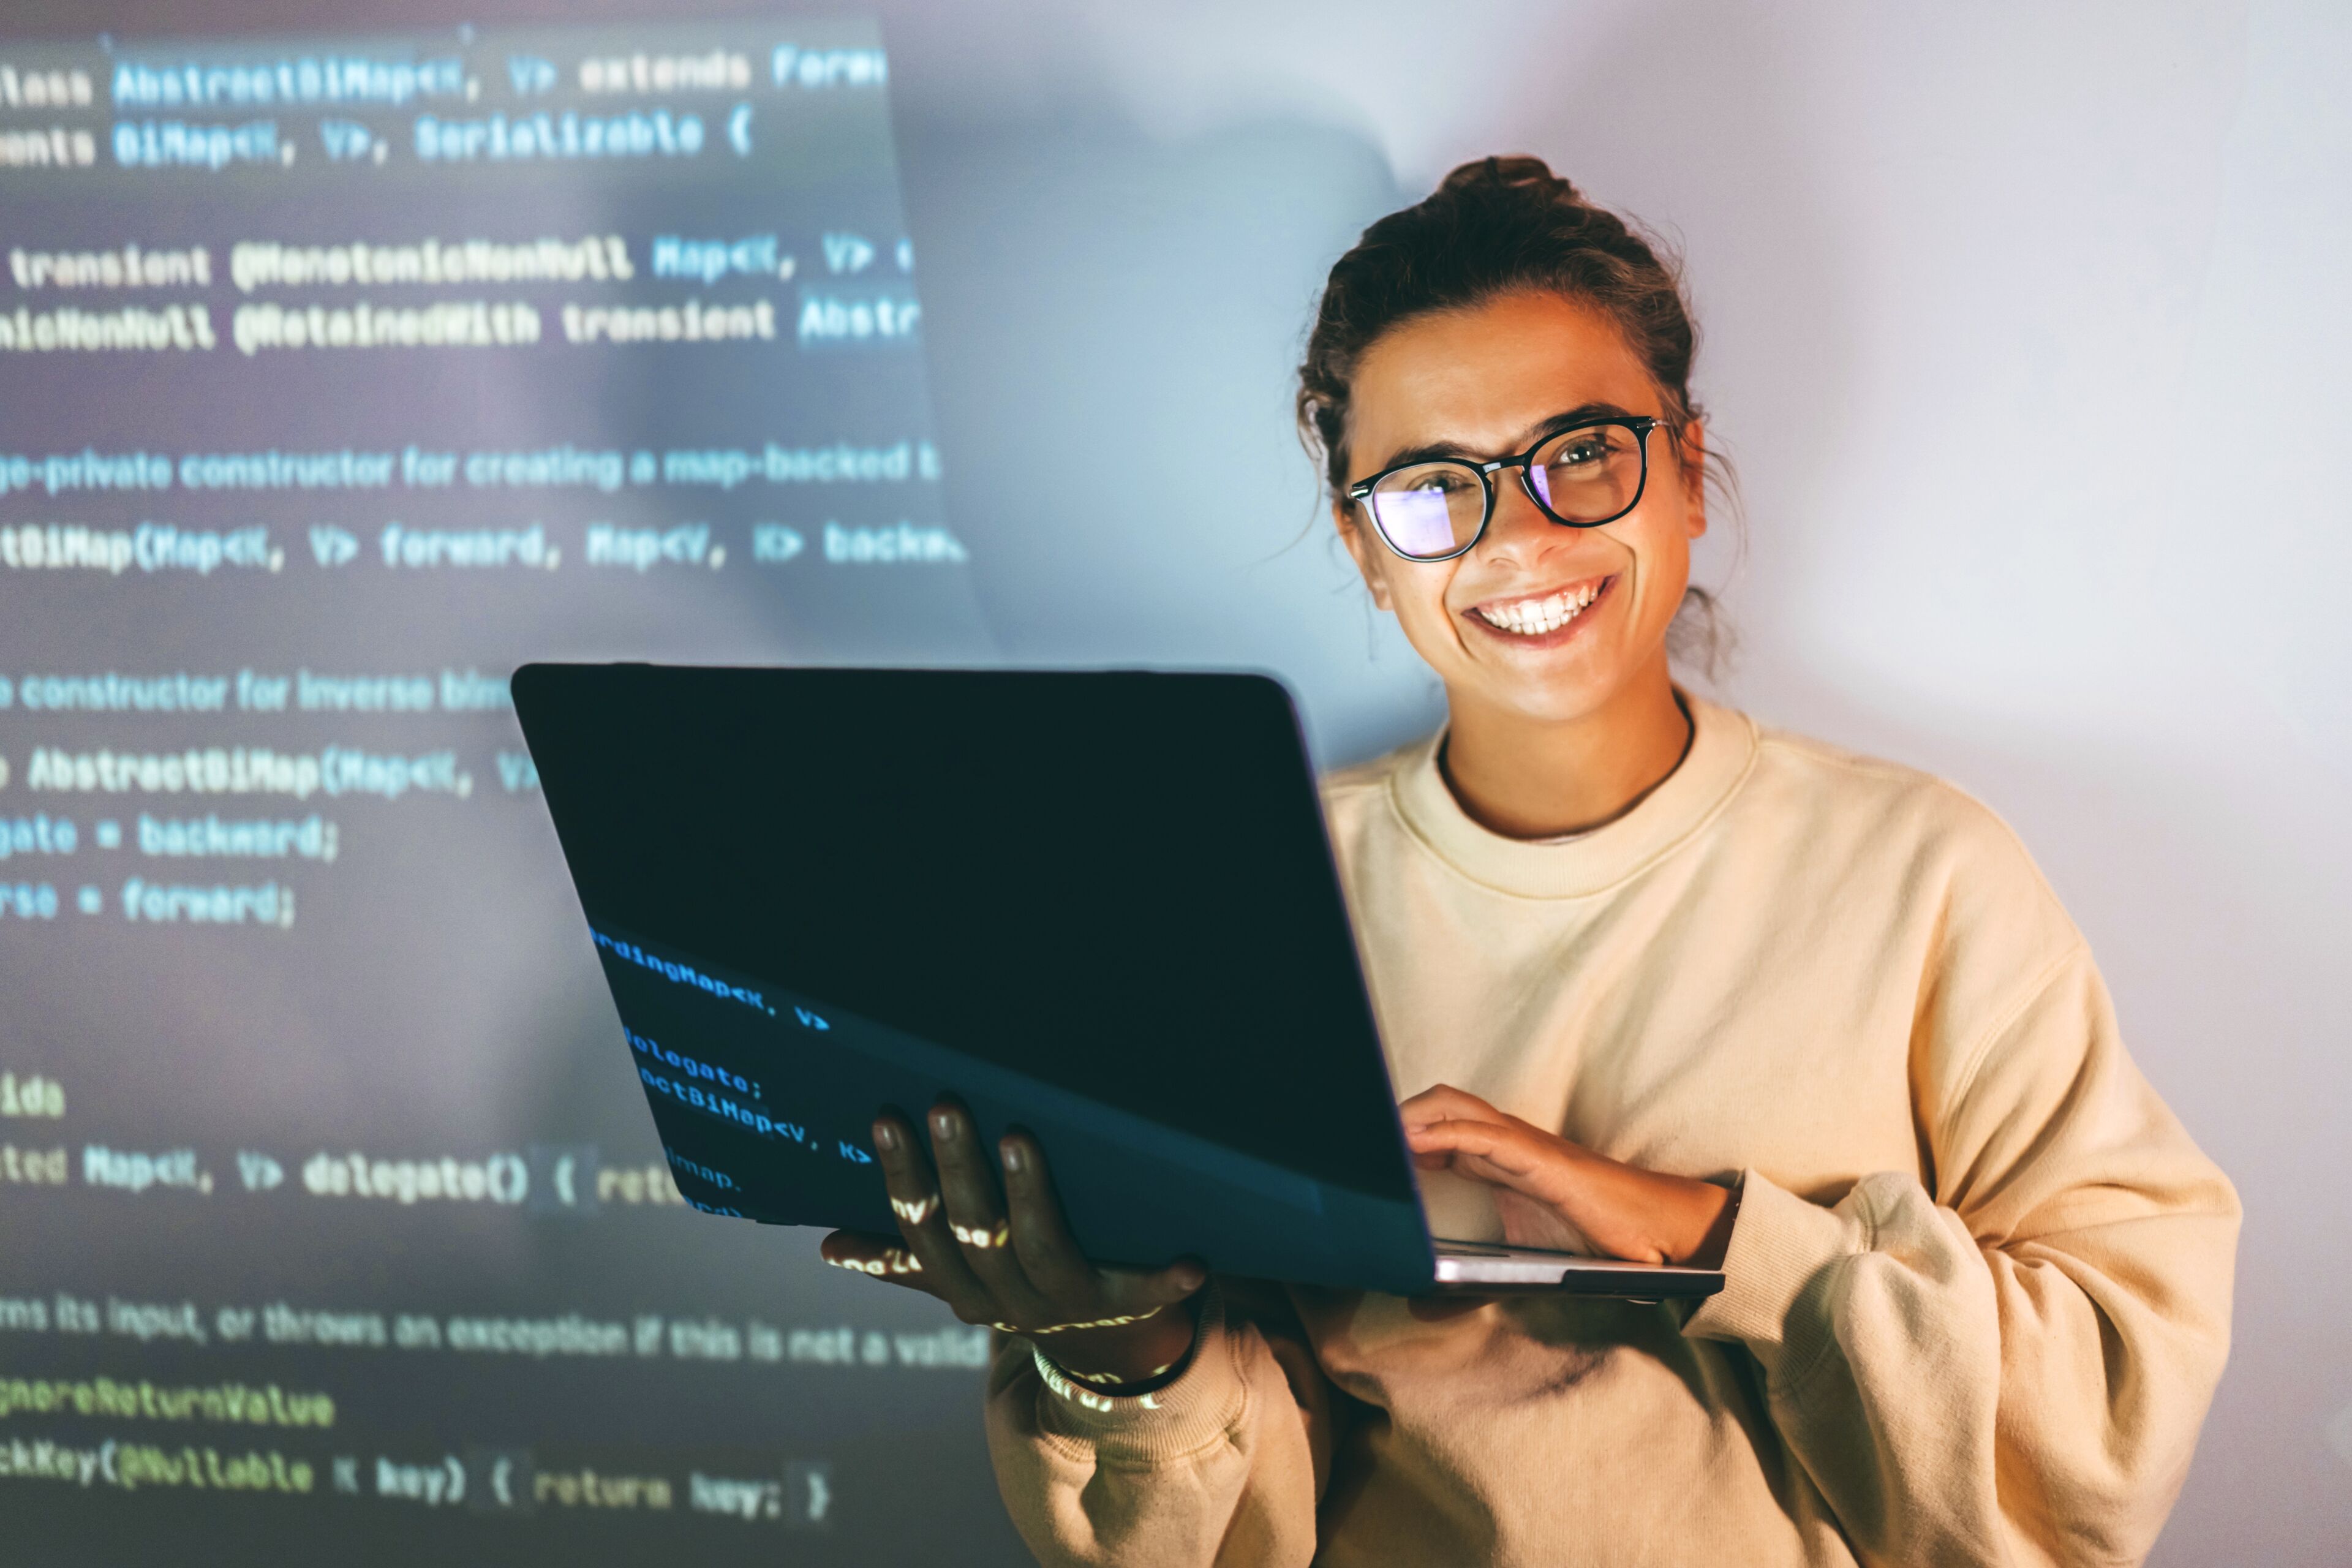 A cheerful woman with glasses holding a laptop, displaying code, projects a sense of accomplishment and expertise in programming.